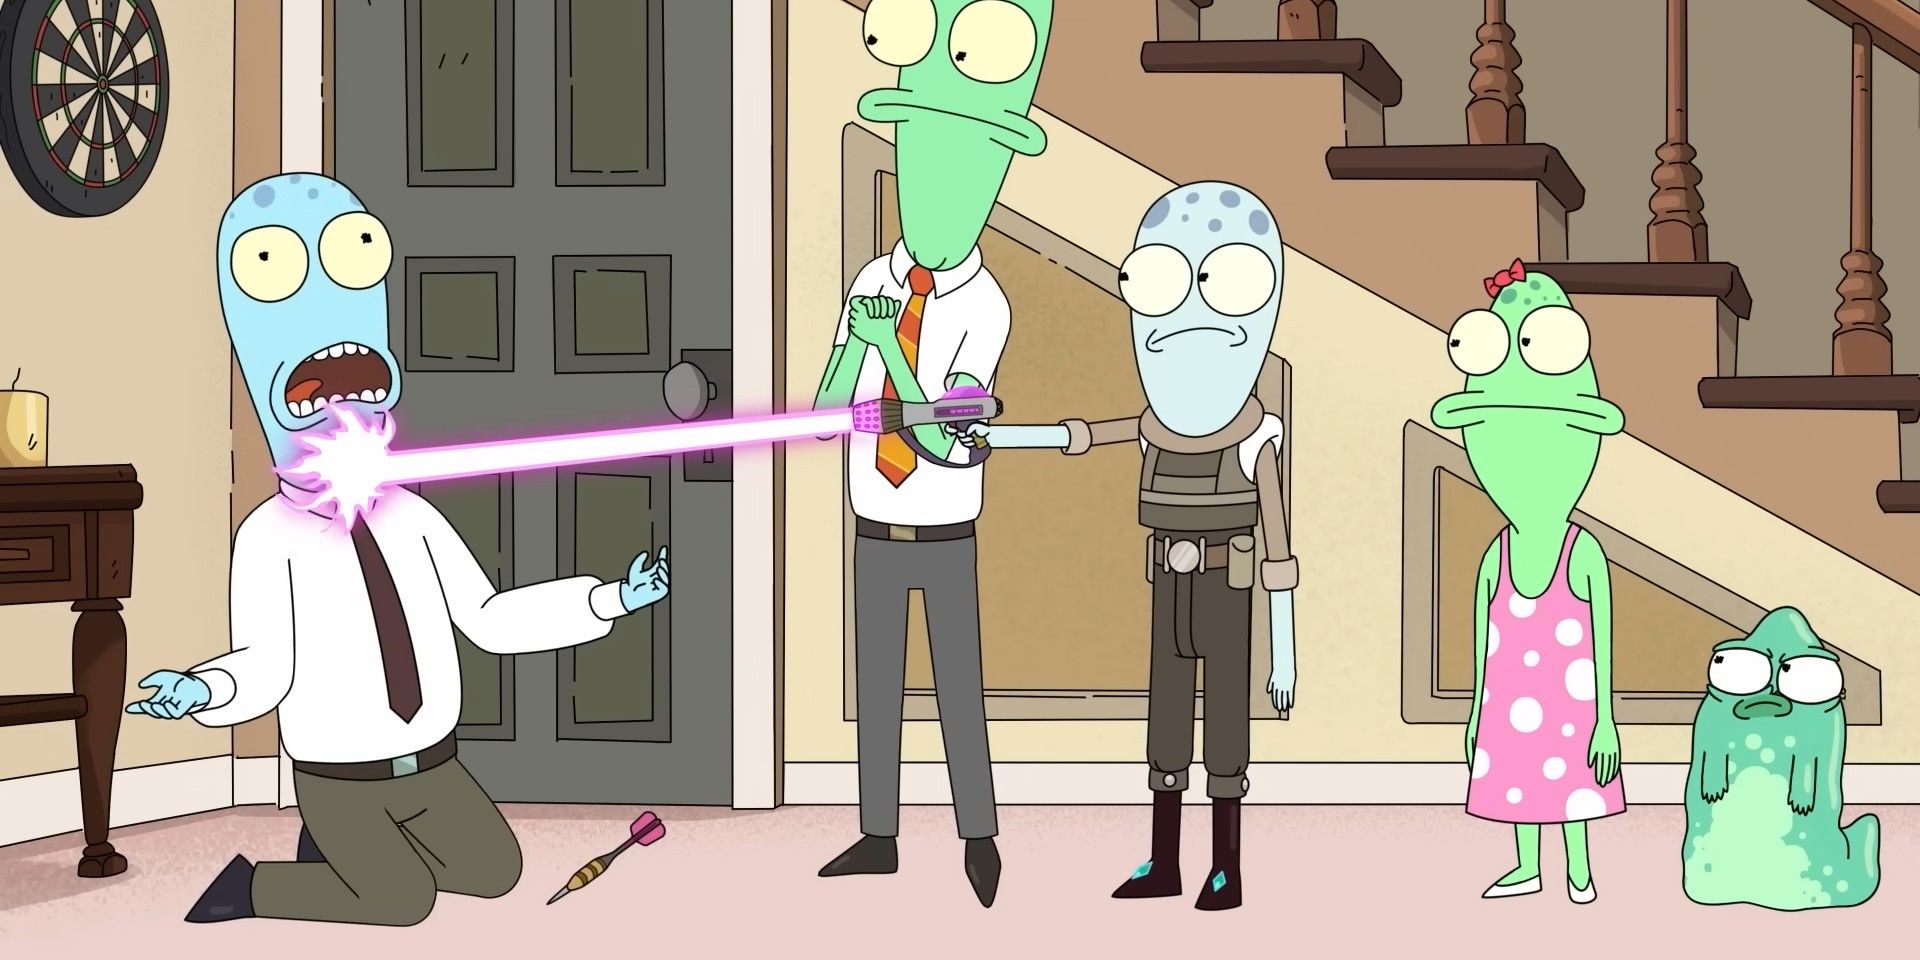 Why Solar Opposites Method of Recasting Wouldn't Work For Rick & Morty